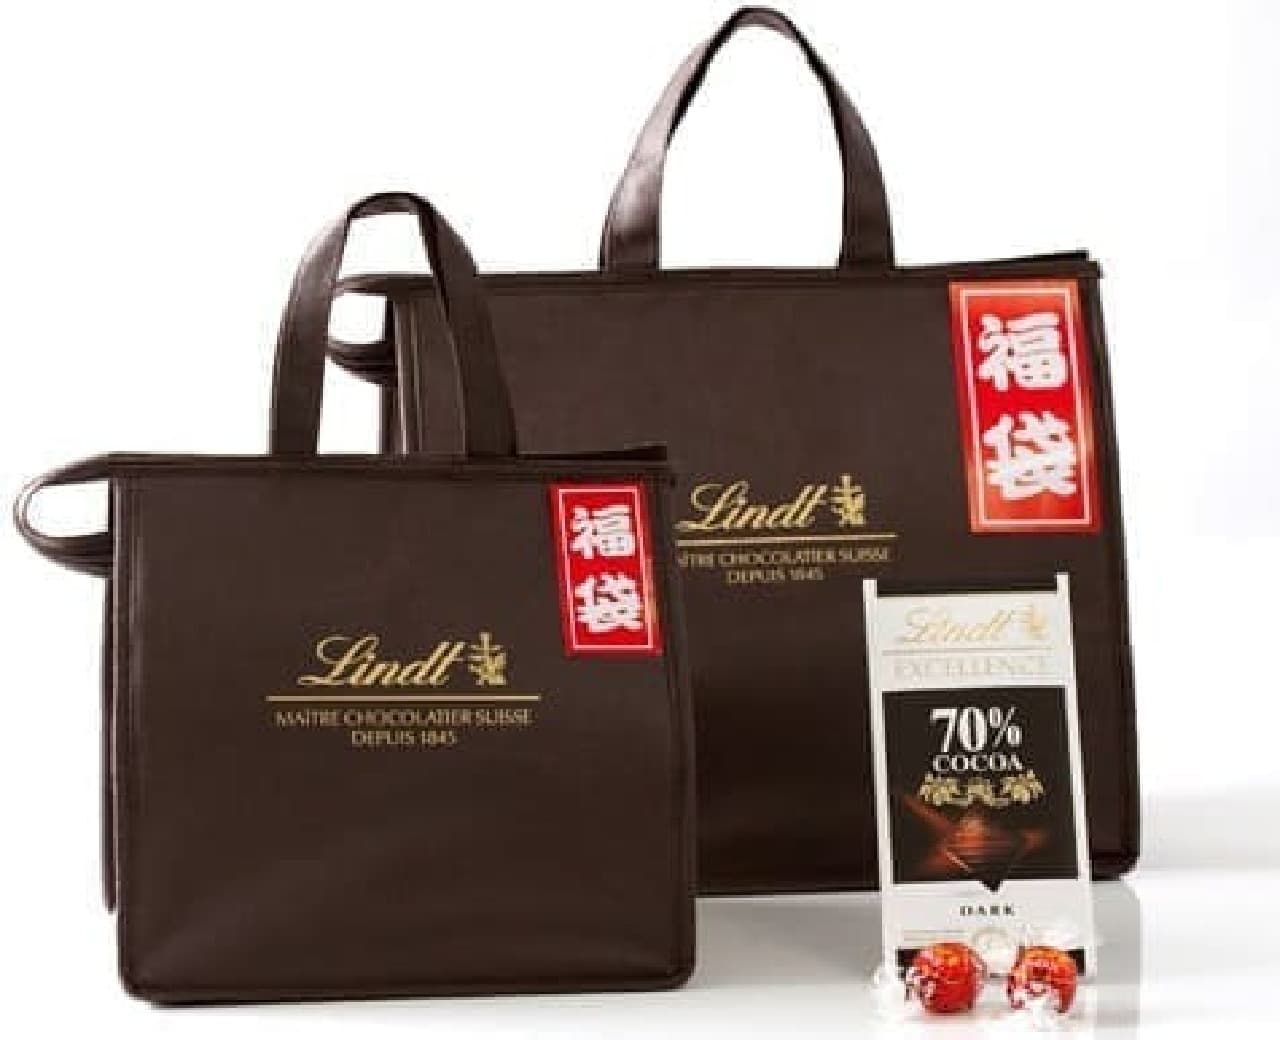 Lindt "Lindt chocolate lucky bag"